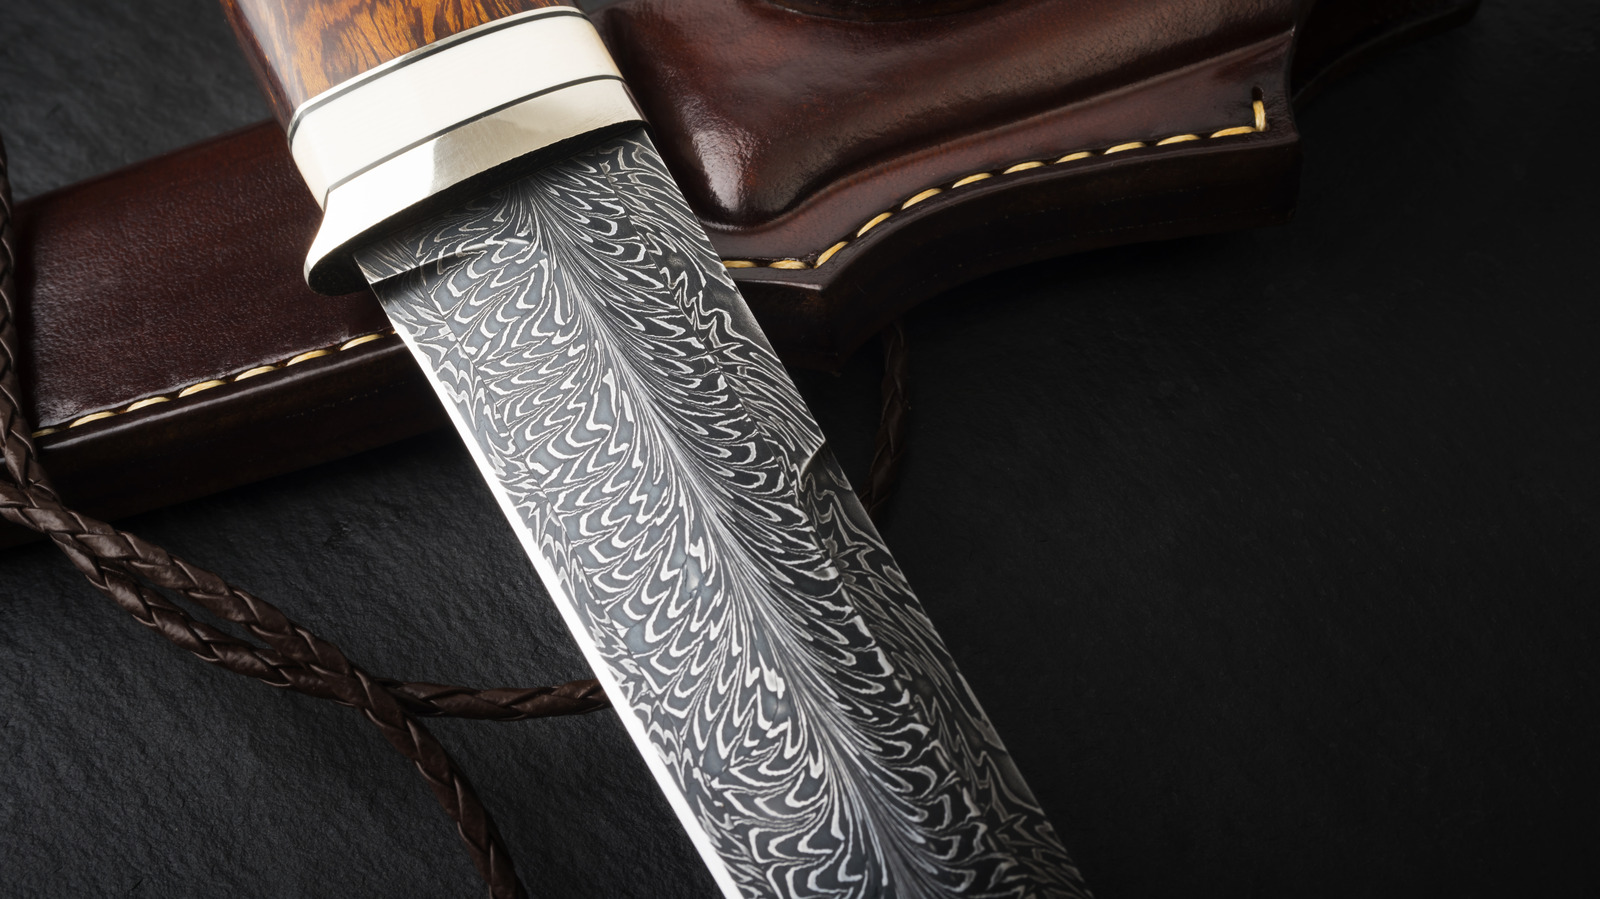 real damascus steel